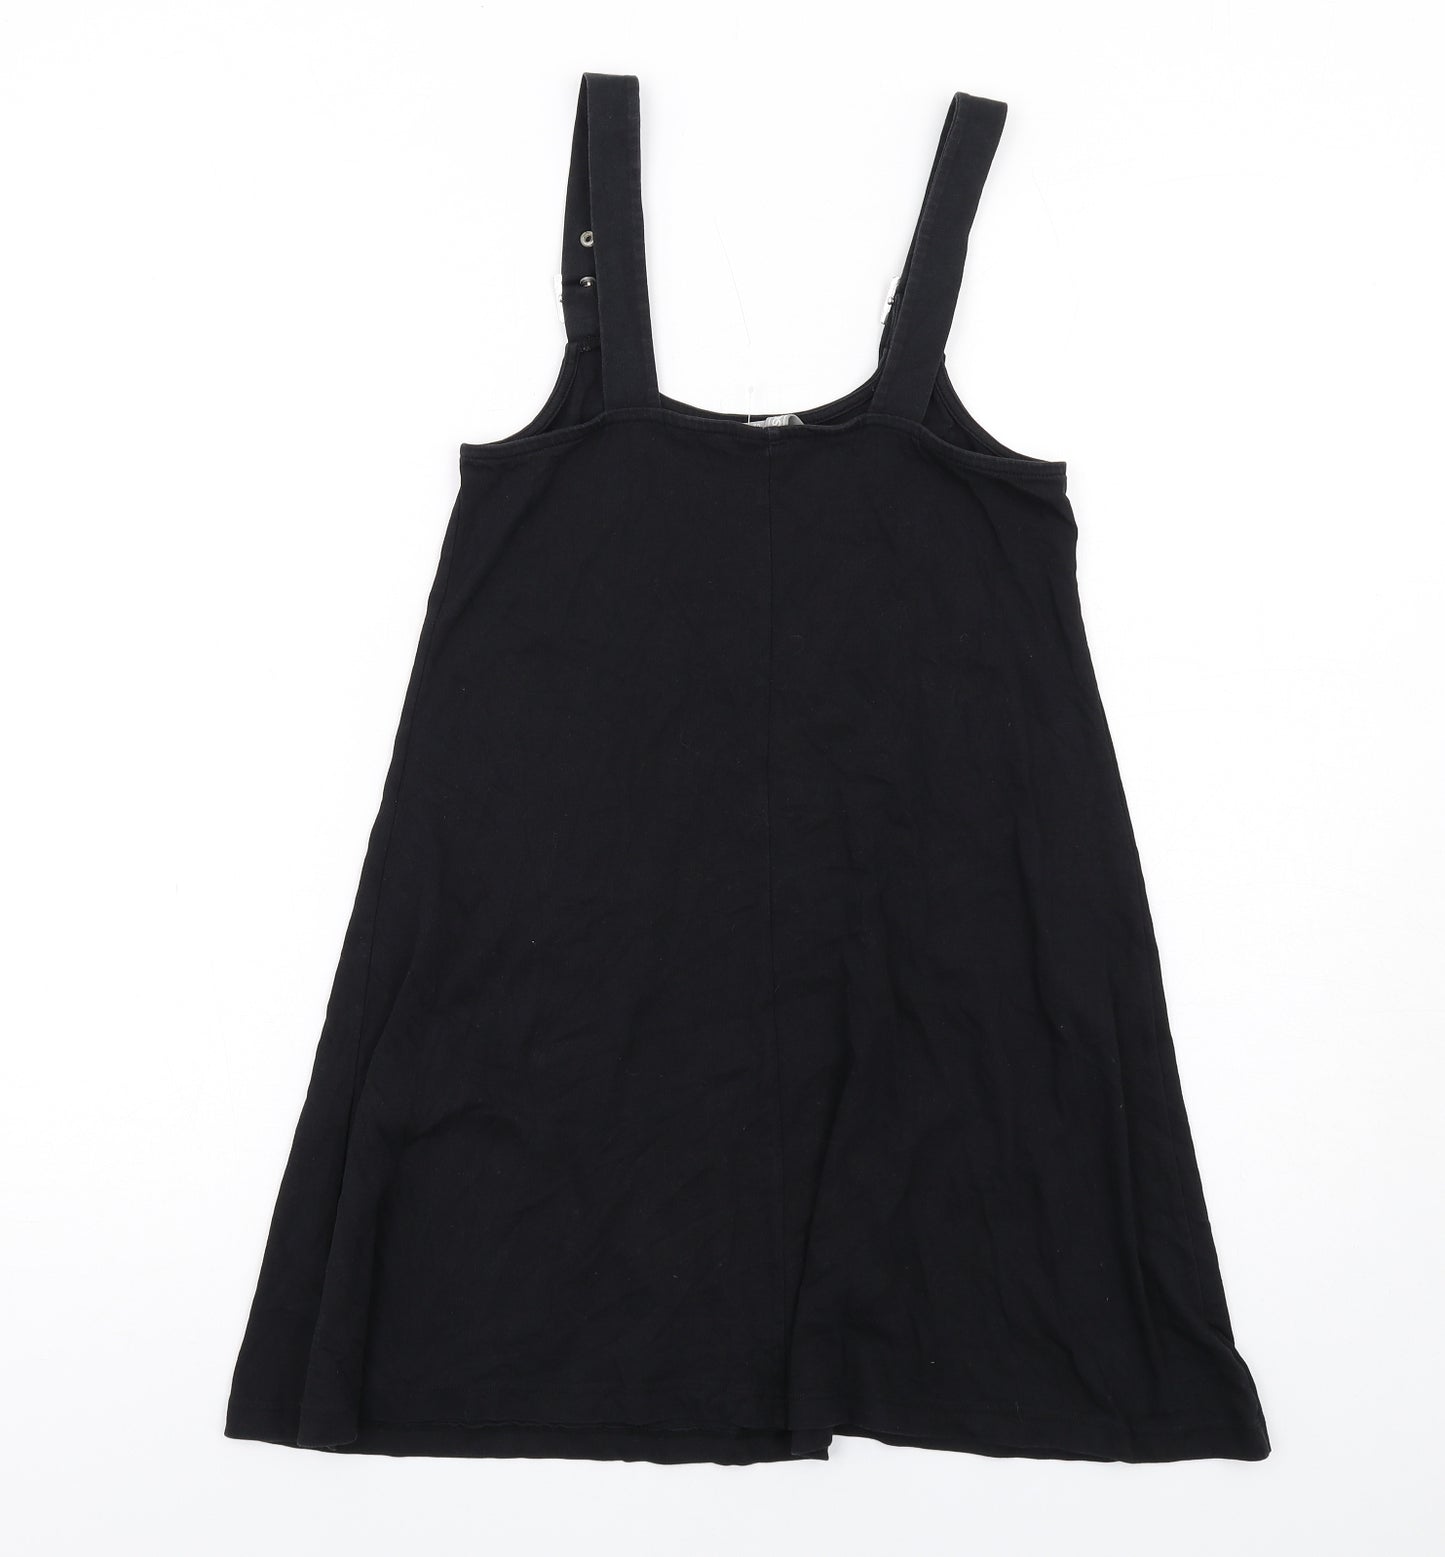 ASOS Womens Black Cotton Pinafore/Dungaree Dress Size 8 Scoop Neck Pullover